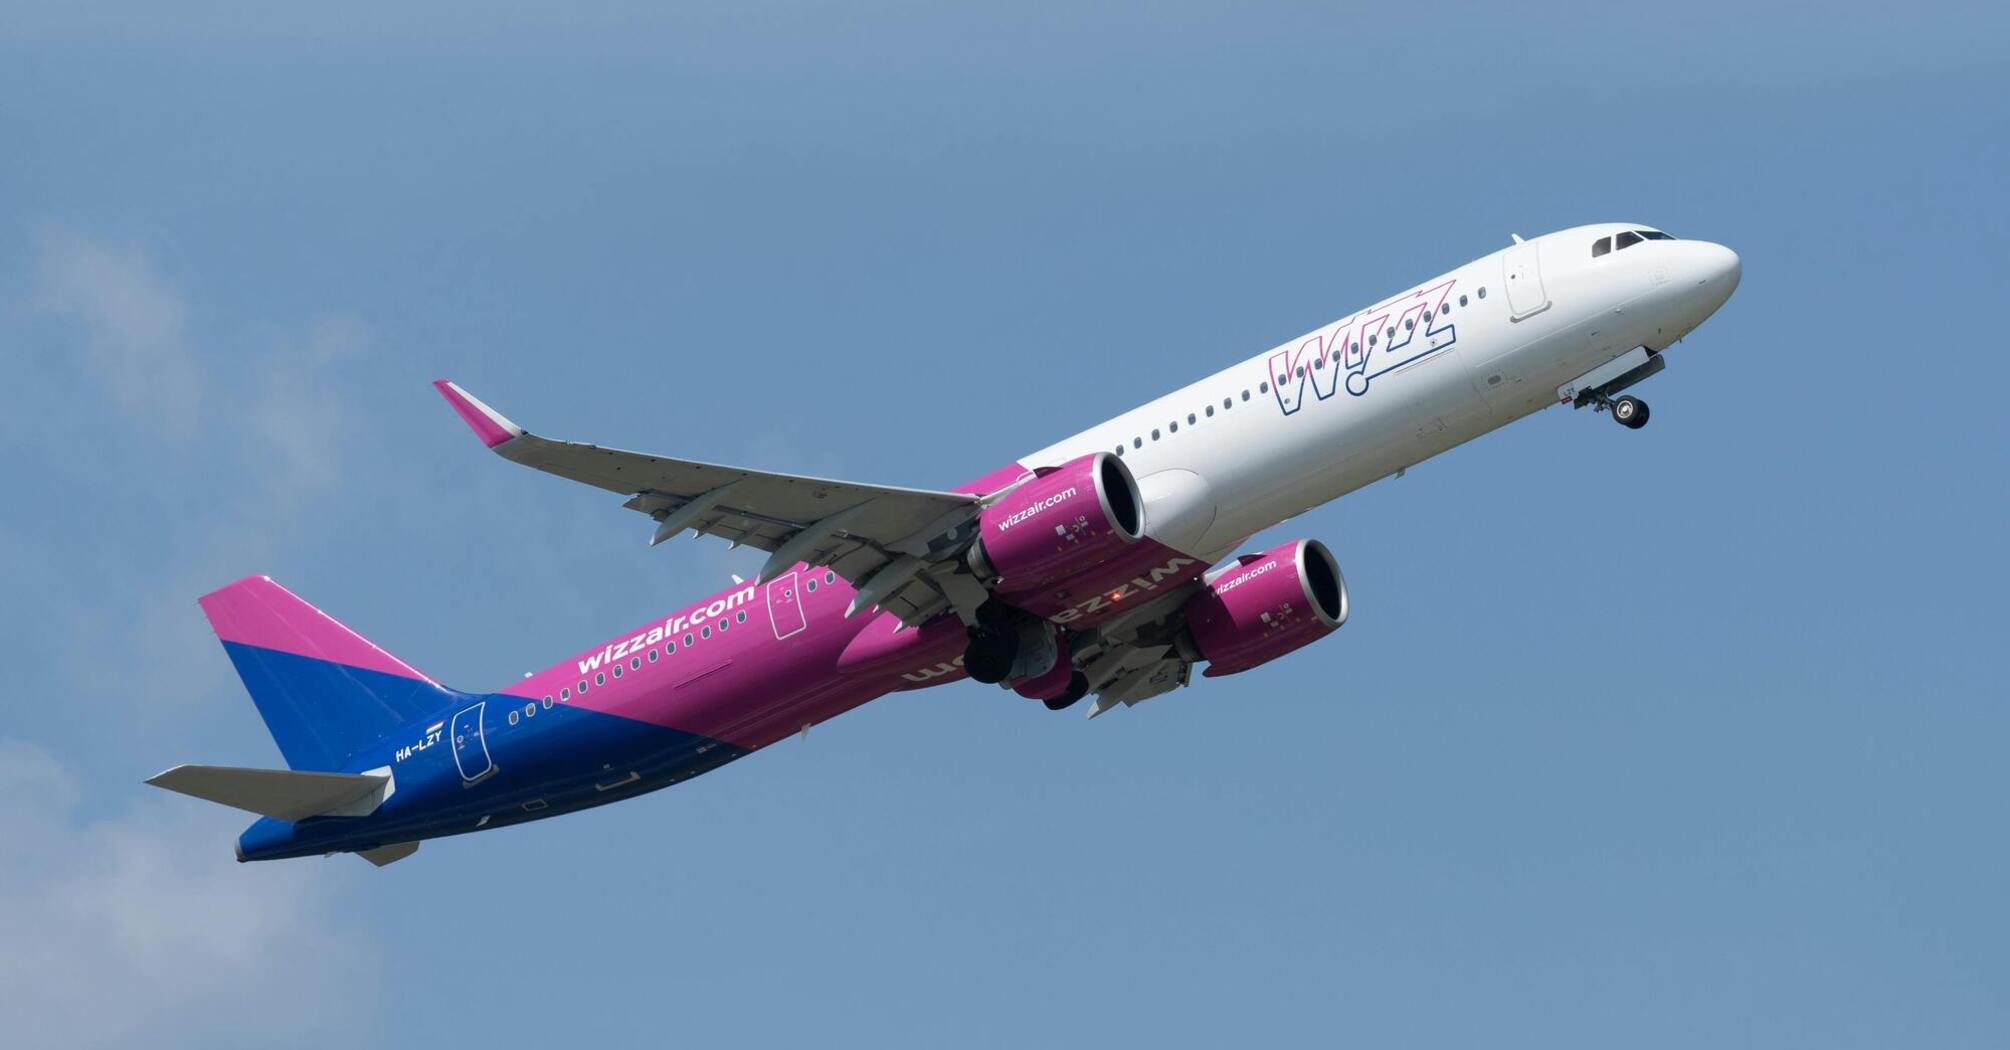 Hungarian airline Wizz Air is receiving bad news: panic over the loss of thousands of passengers.